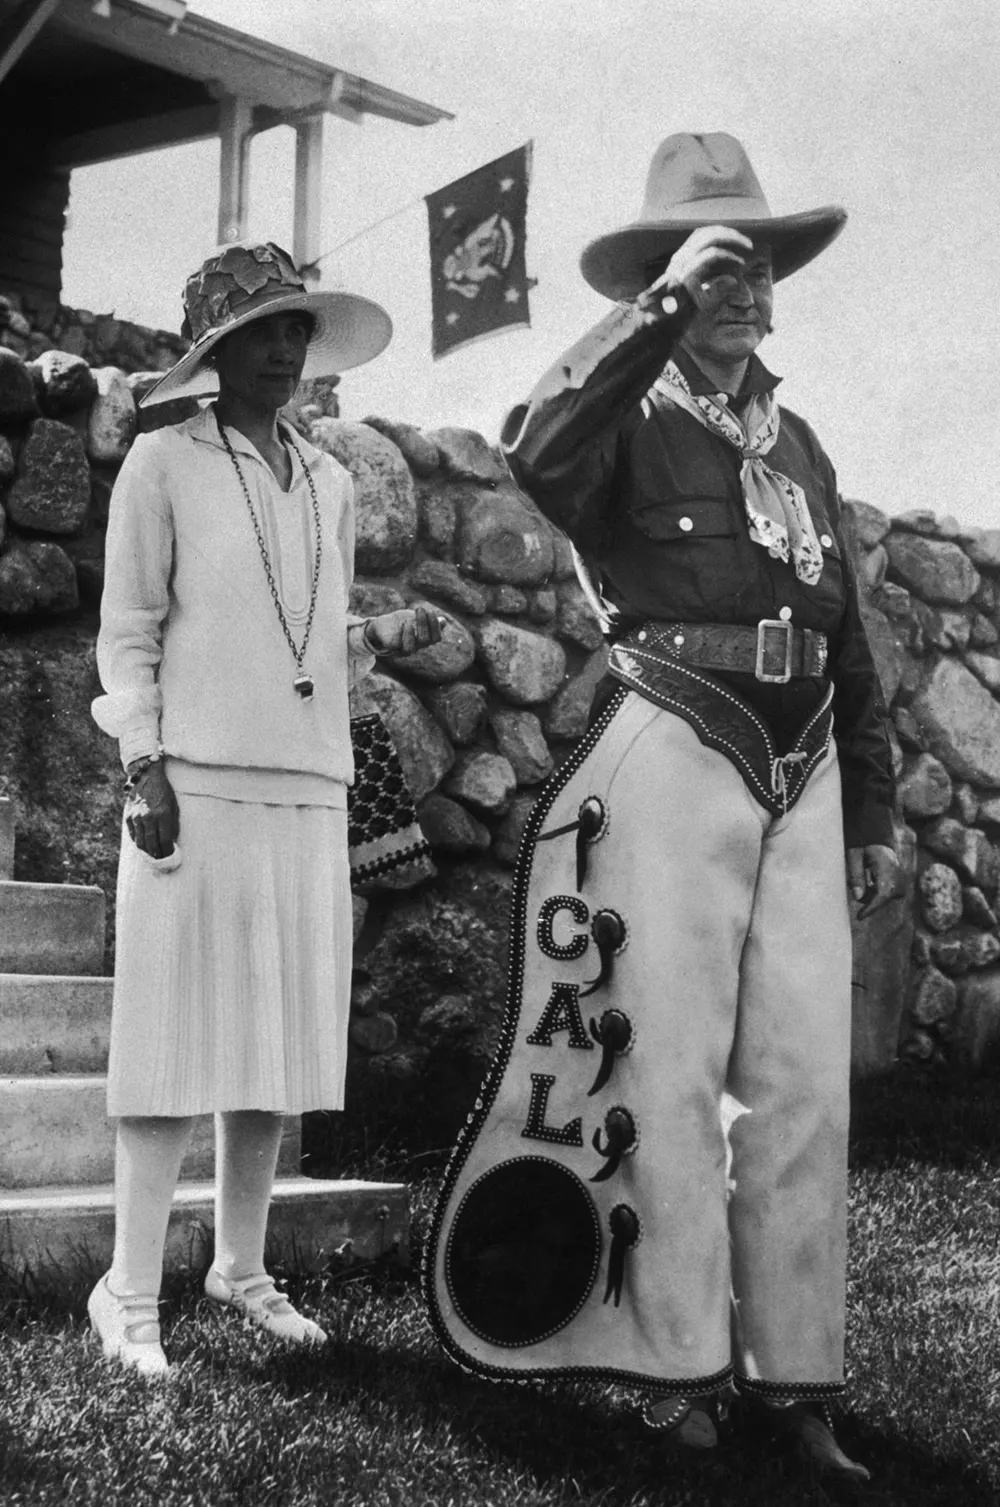 Calvin Coolidge celebrates the 4th of July and his 55th birthday with his wife Grace at a Game Lodge in South Dakota, 1927.